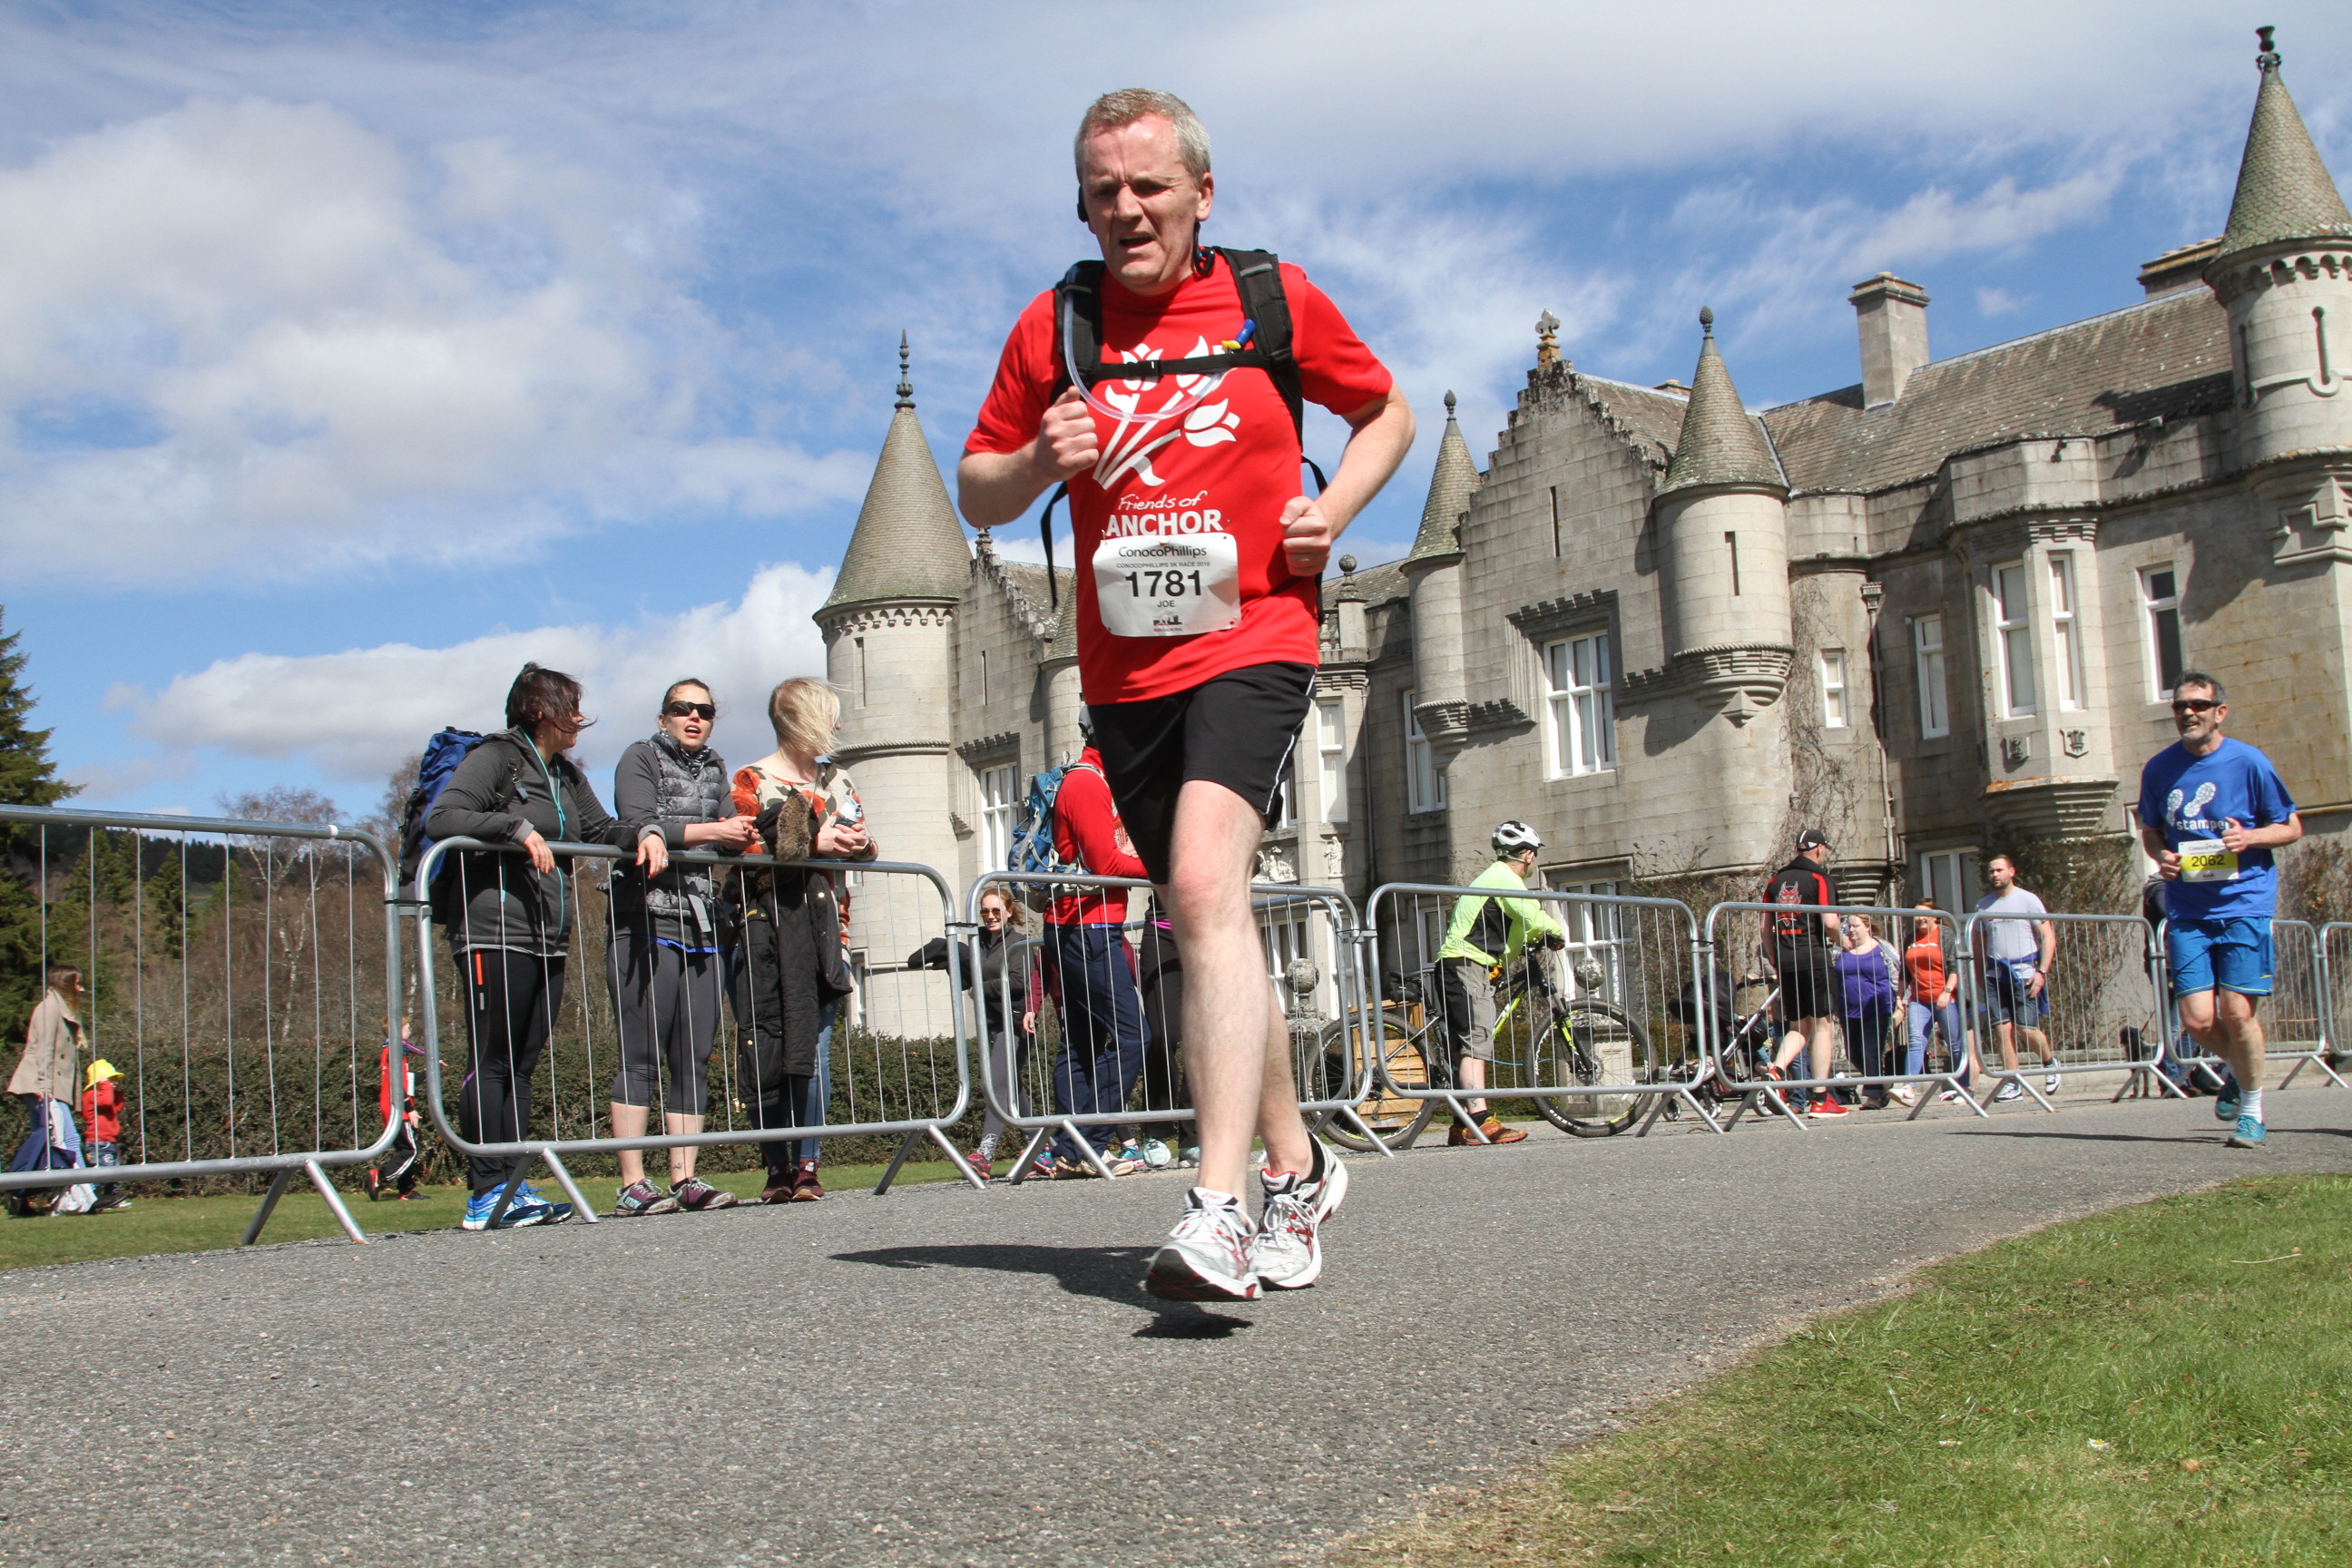 Mr Boyle will run the half marathon and is hoping to raise £10,000